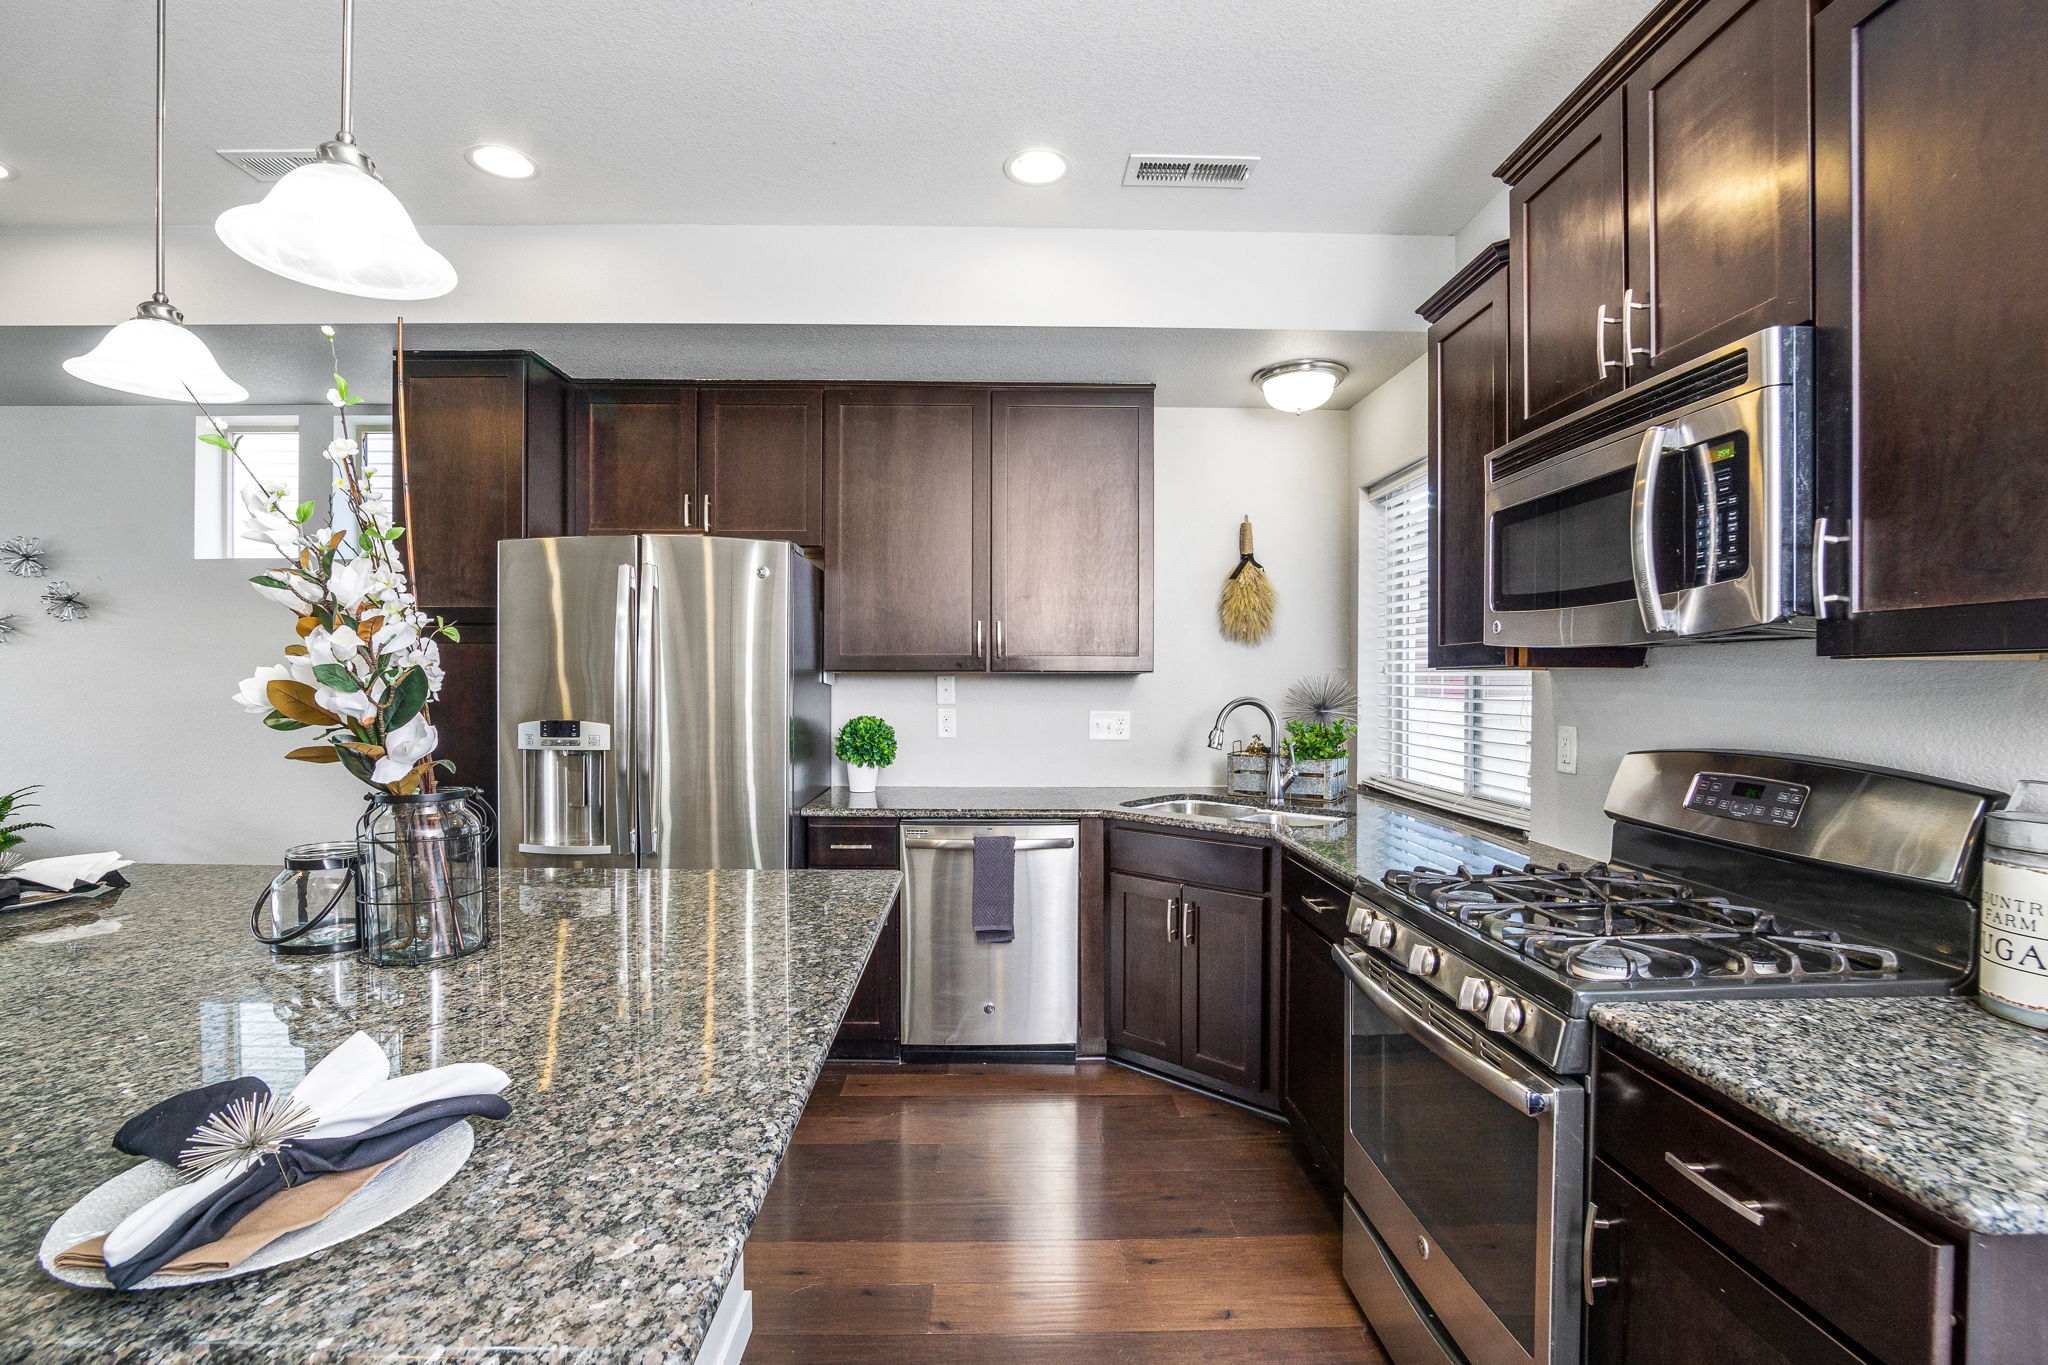 Granite counter tops and ample cabinet space